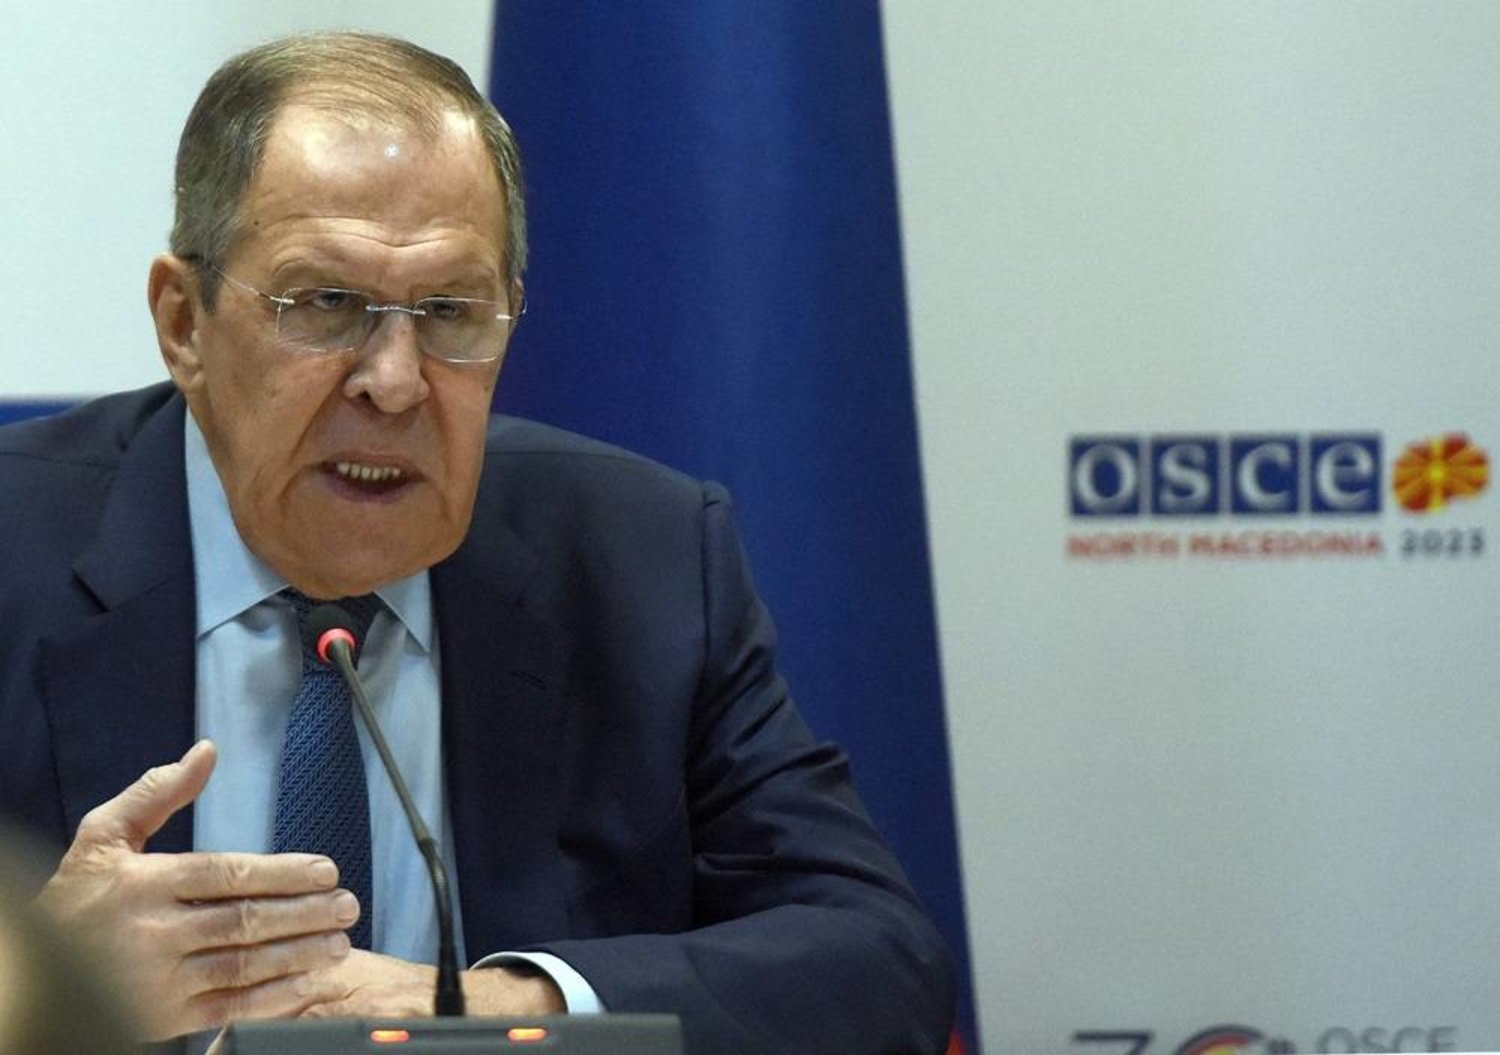 Russian Foreign Minister Sergei Lavrov holds a press conference on the sidelines of a two-day conference of the Organization for Security and Cooperation (OSCE) in Skopje on December 1, 2023. (AFP)